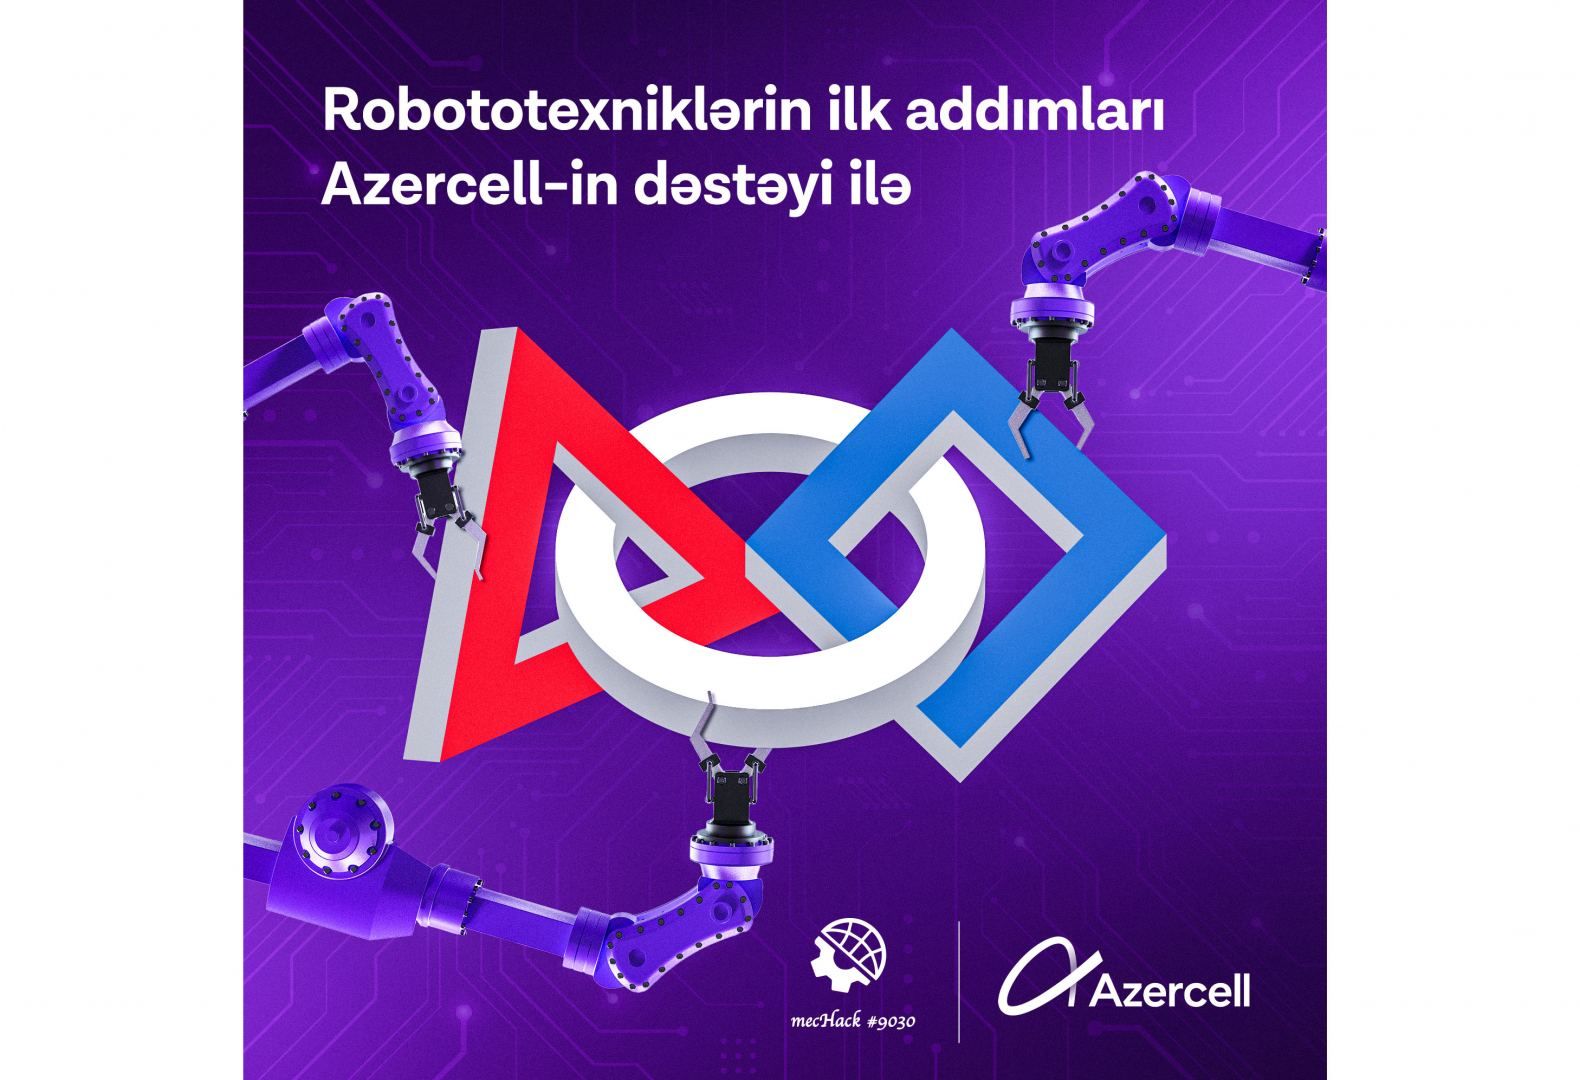 Azerbaijani roboticists supported by Azercell won the Rookie Inspiration award in the final of the FRC!